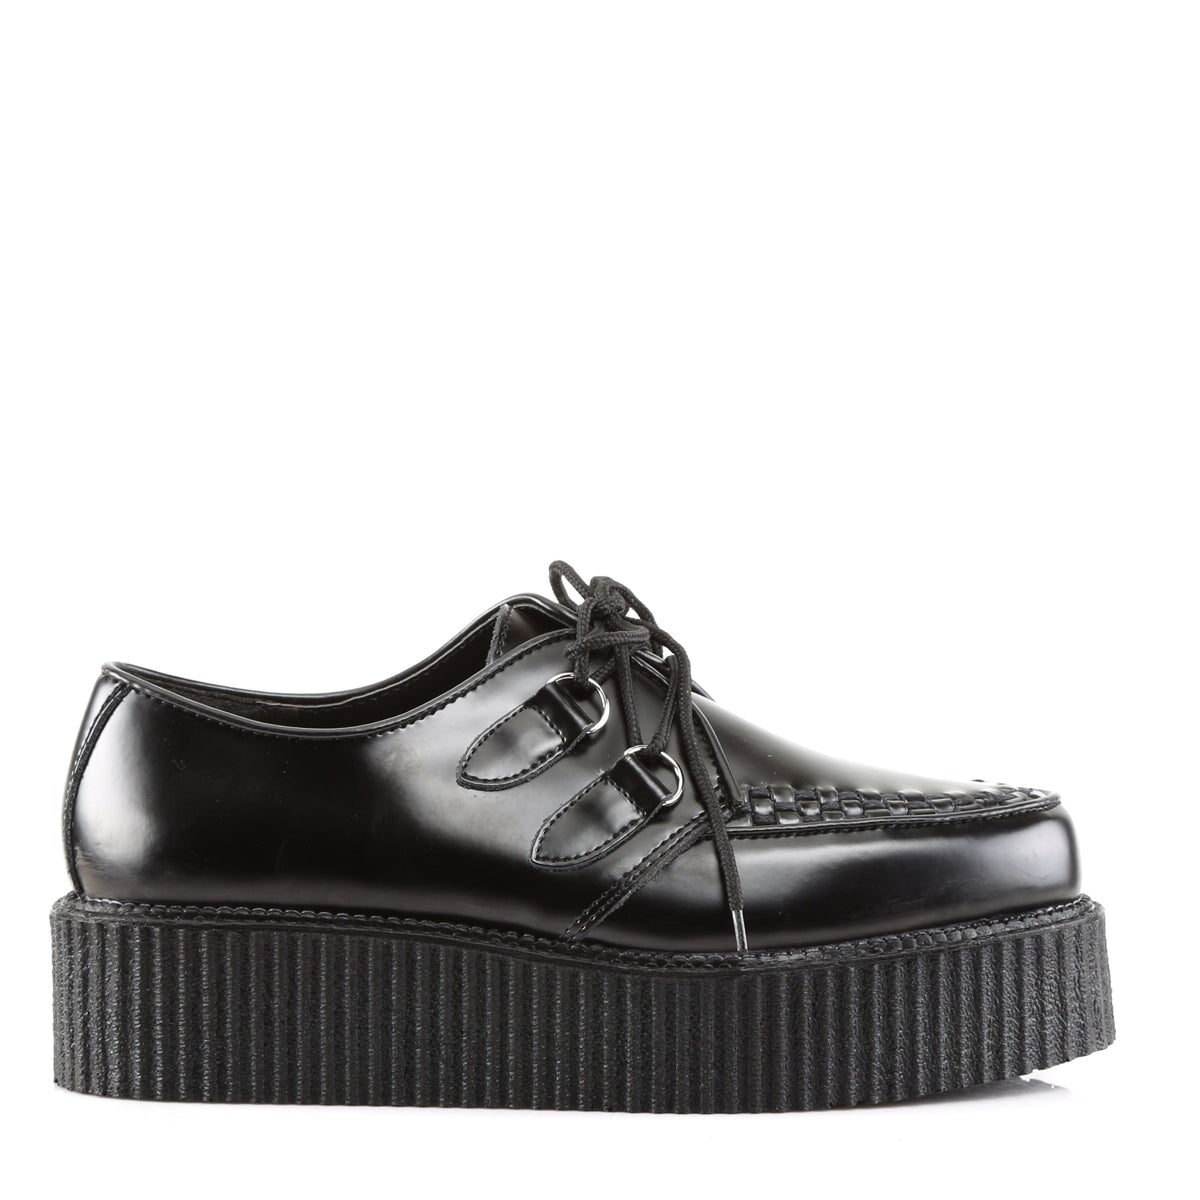 Demonia Creeper-402 Unisex Creepers | Buy Sexy Shoes at Shoefreaks.ca